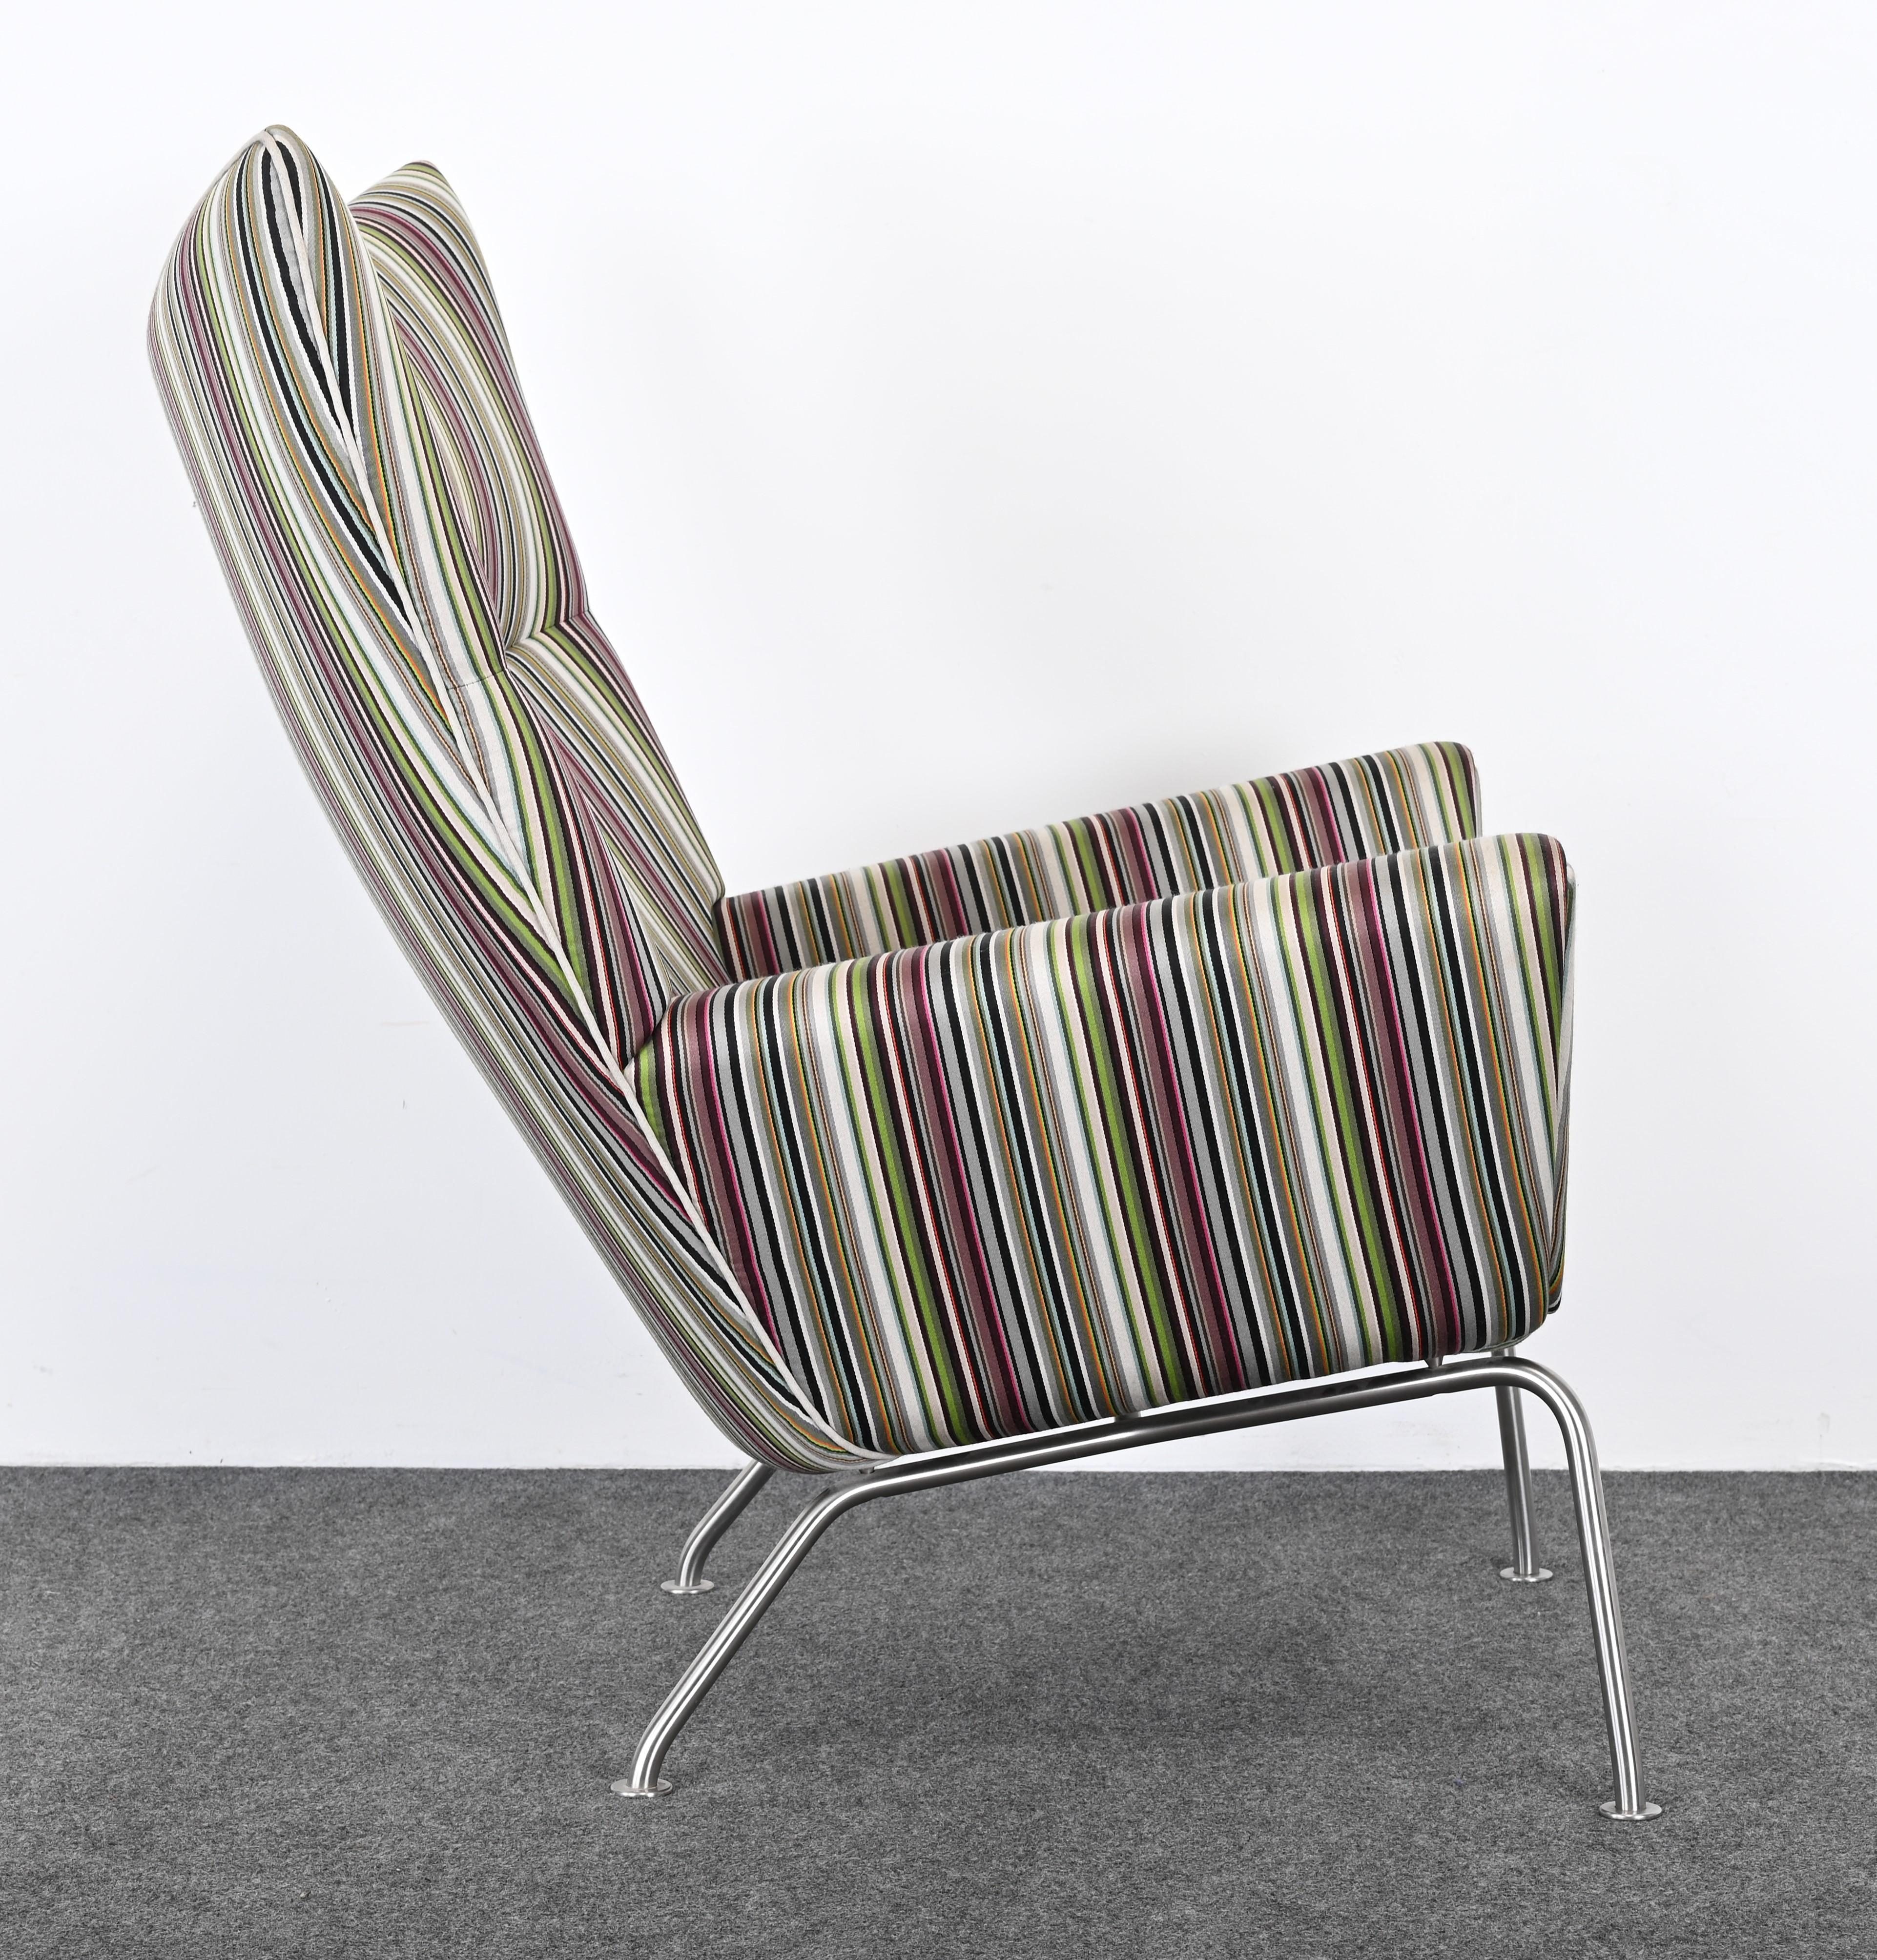 CH445 Wing Lounge Chair Designed by Hans Wegner for Carl Hansen & Son, 2006 For Sale 3